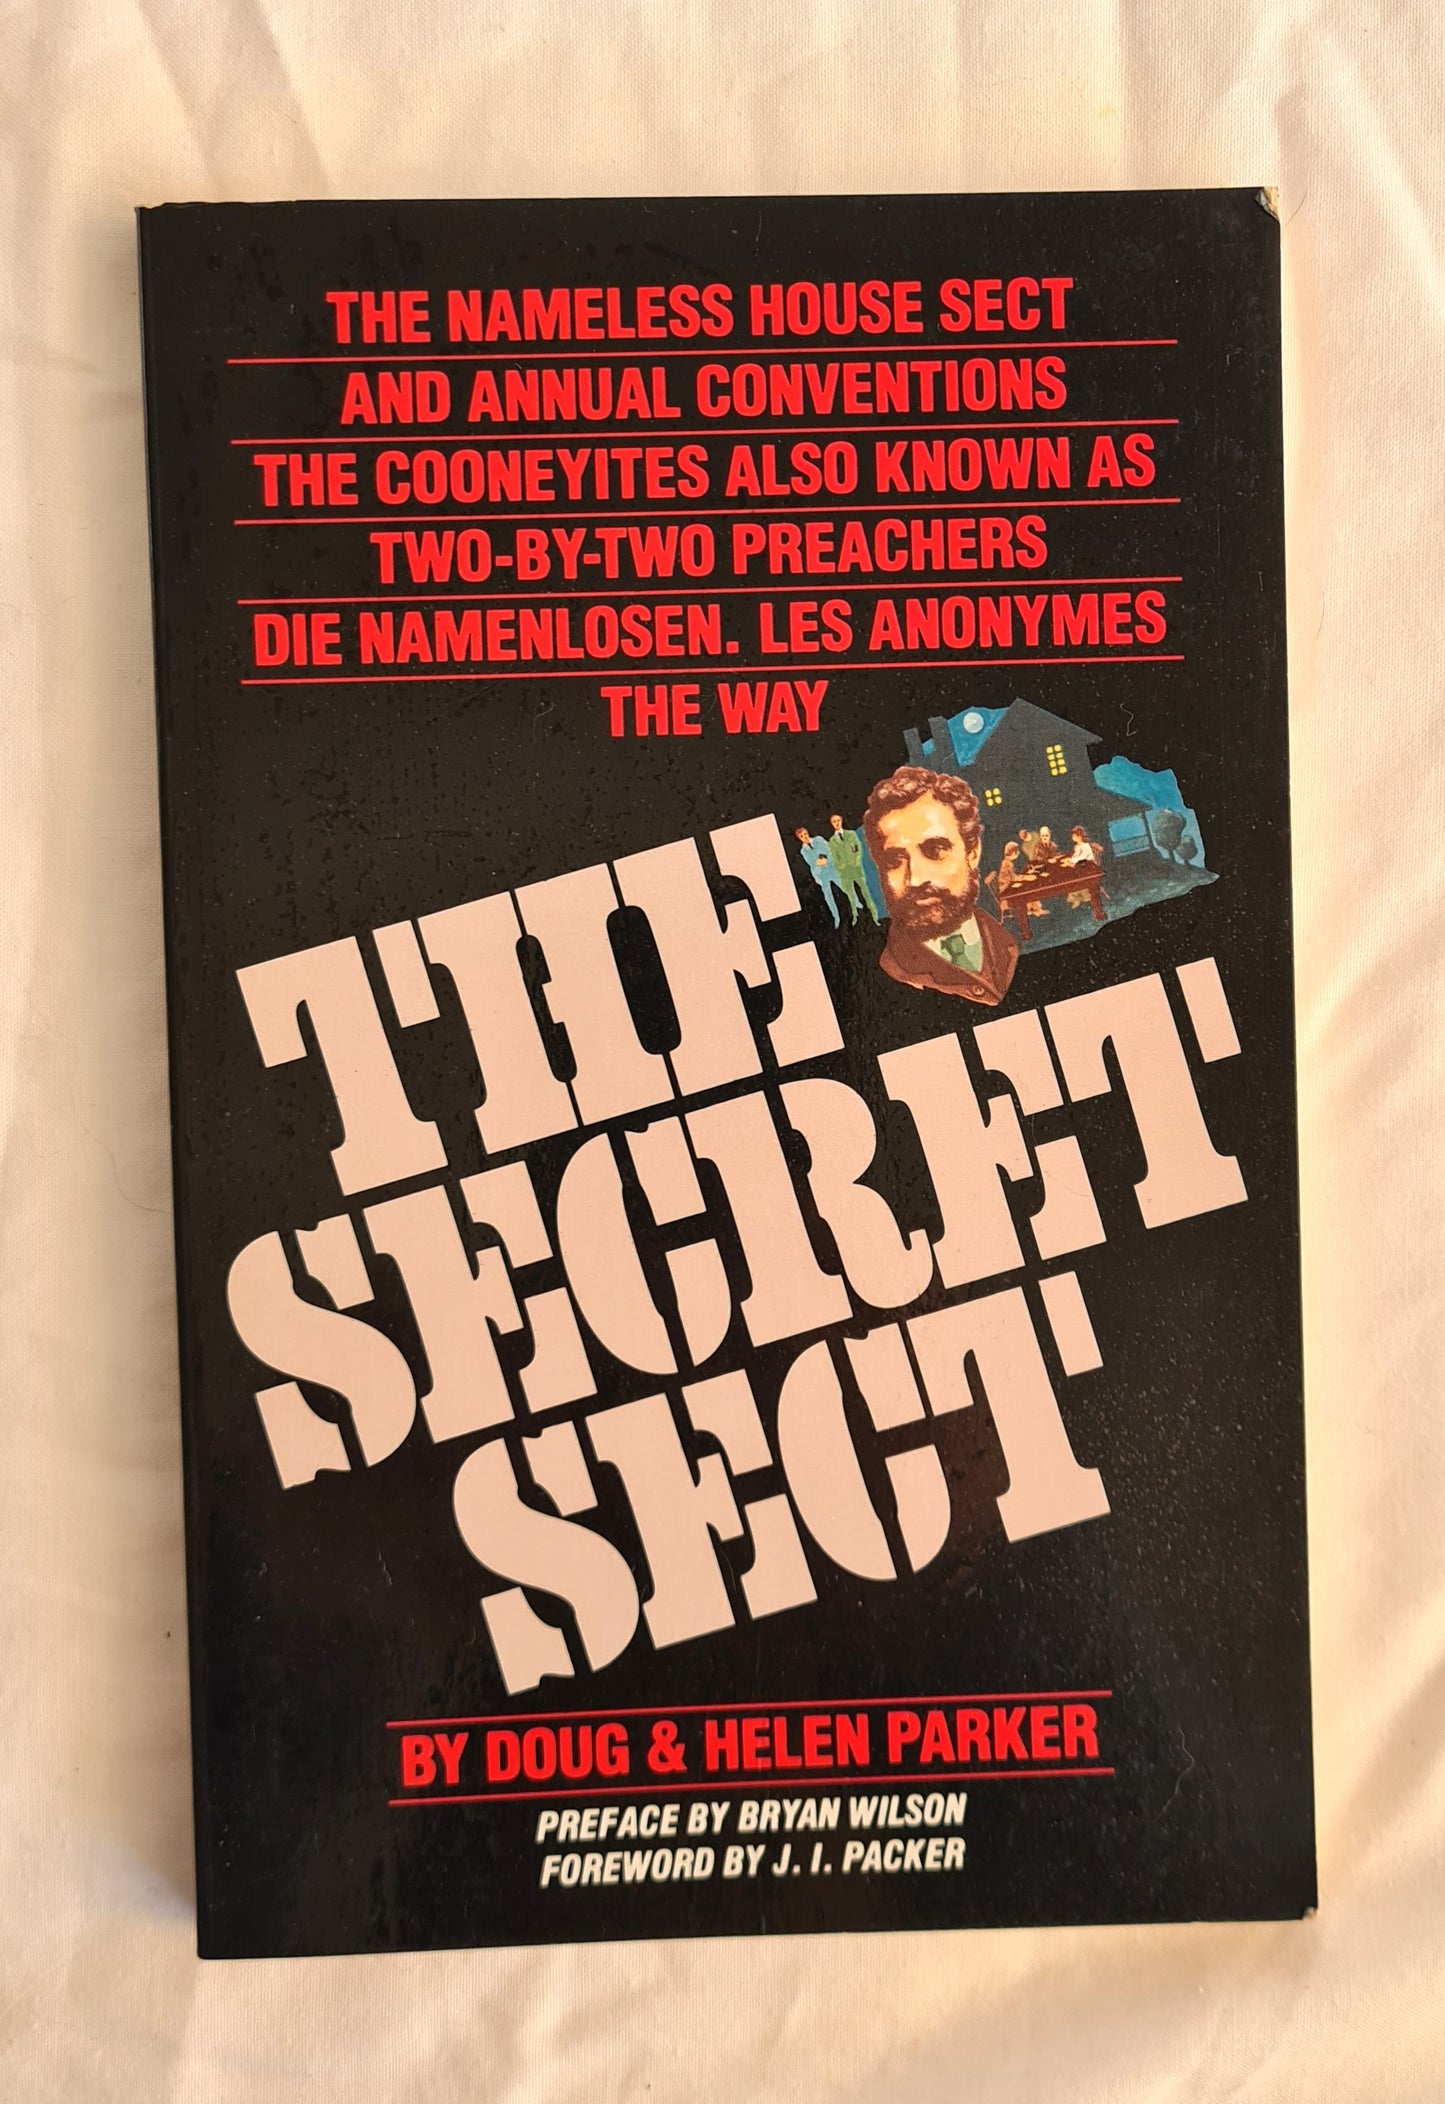 The Secret Sect  by Doug and Helen Parker